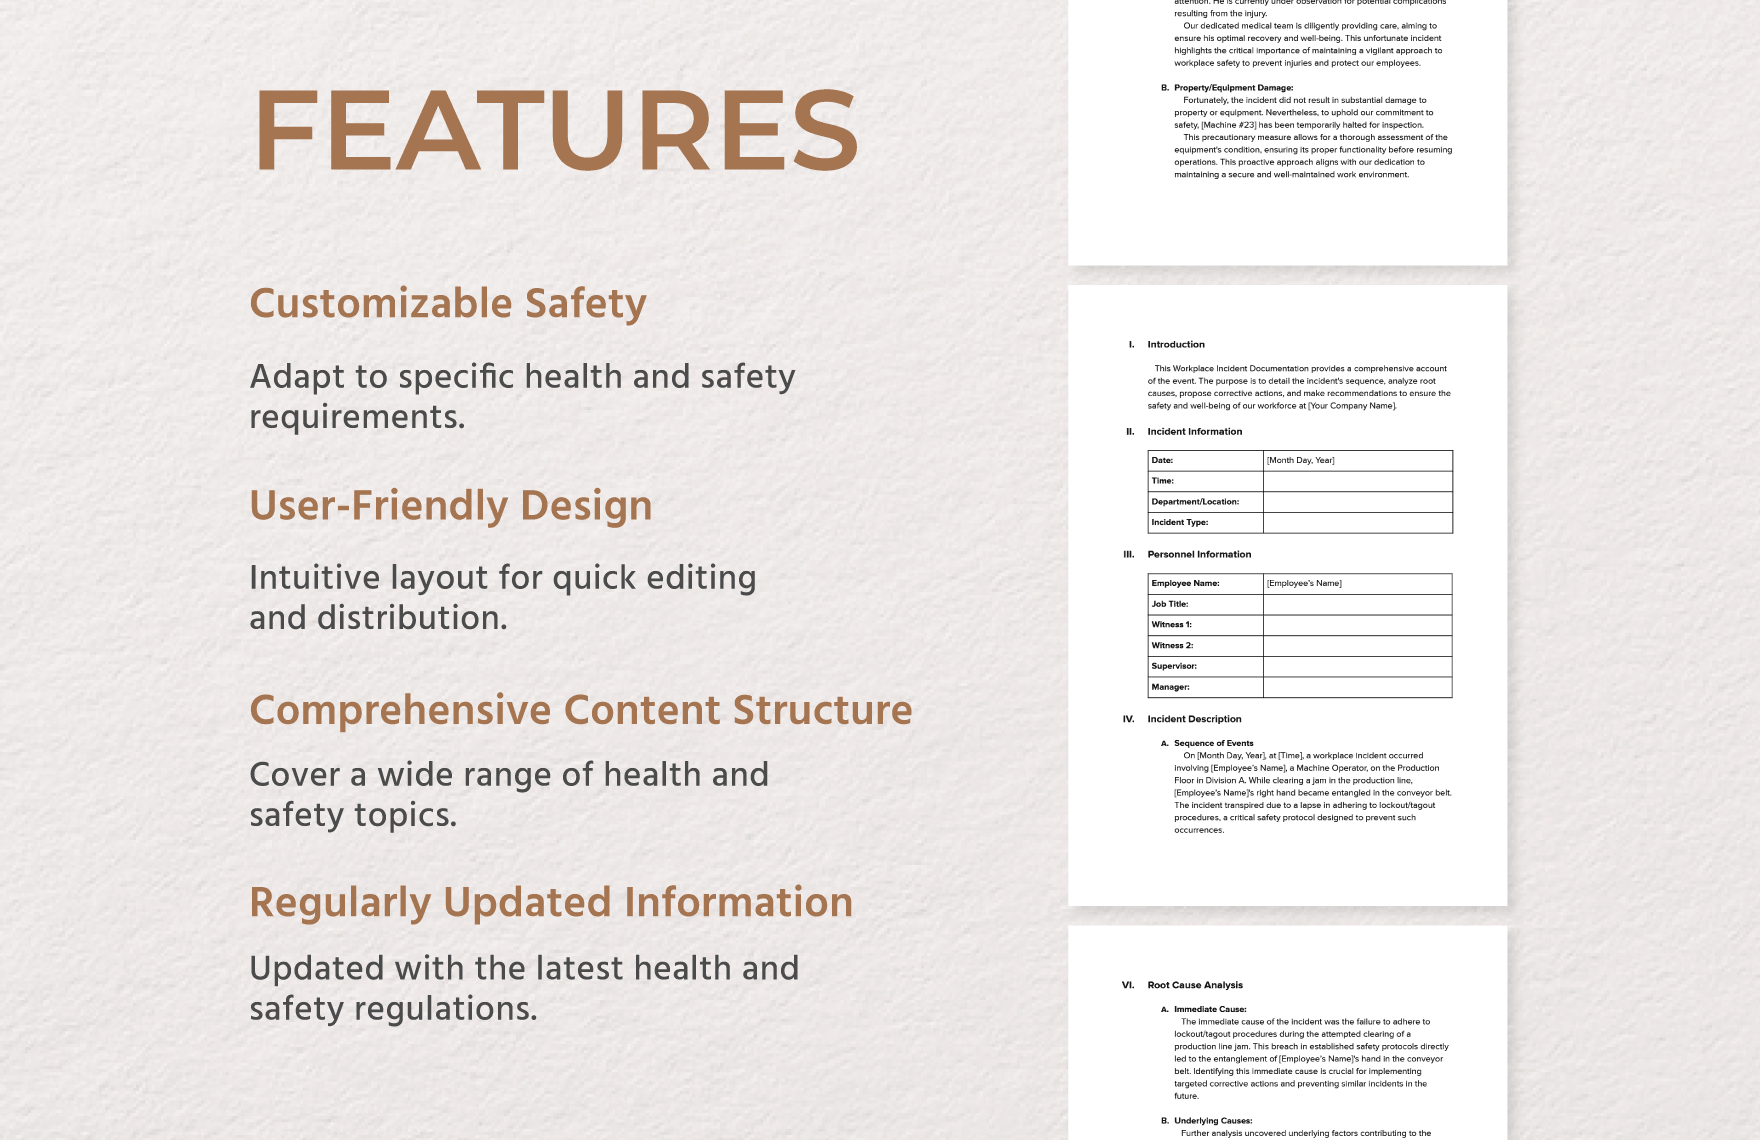 Workplace Incident Documentation Template